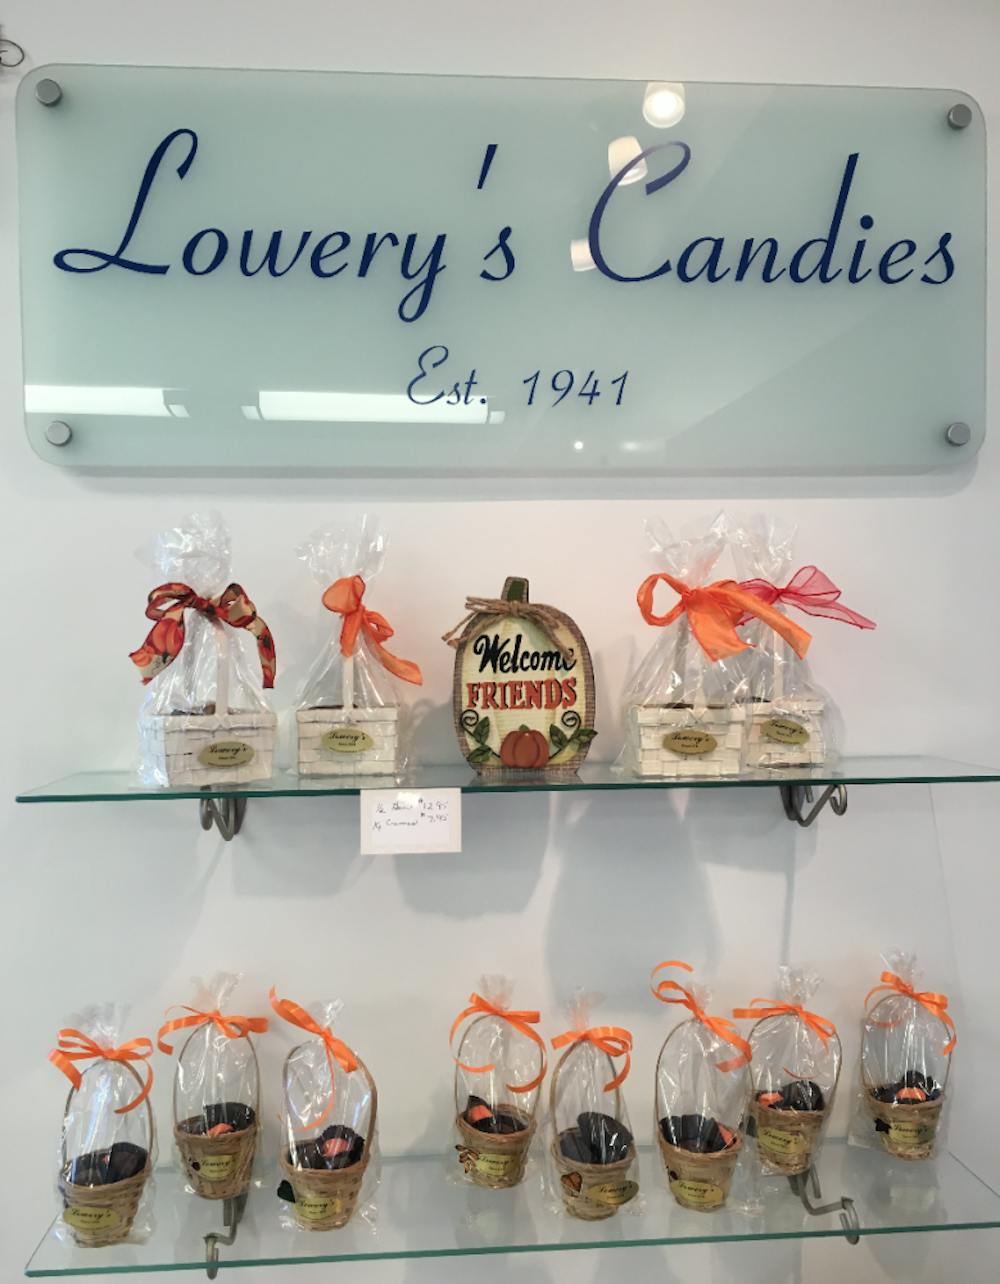 Lowery's Candies, which was started in 1941, sells over 100 varieties of&nbsp;hand-dipped chocolate items. Owners Vicki Brown and her son, Charles Joseph, are the second- and third-generation owners of the family-owned business.&nbsp;Michelle Kaufman&nbsp;// DN